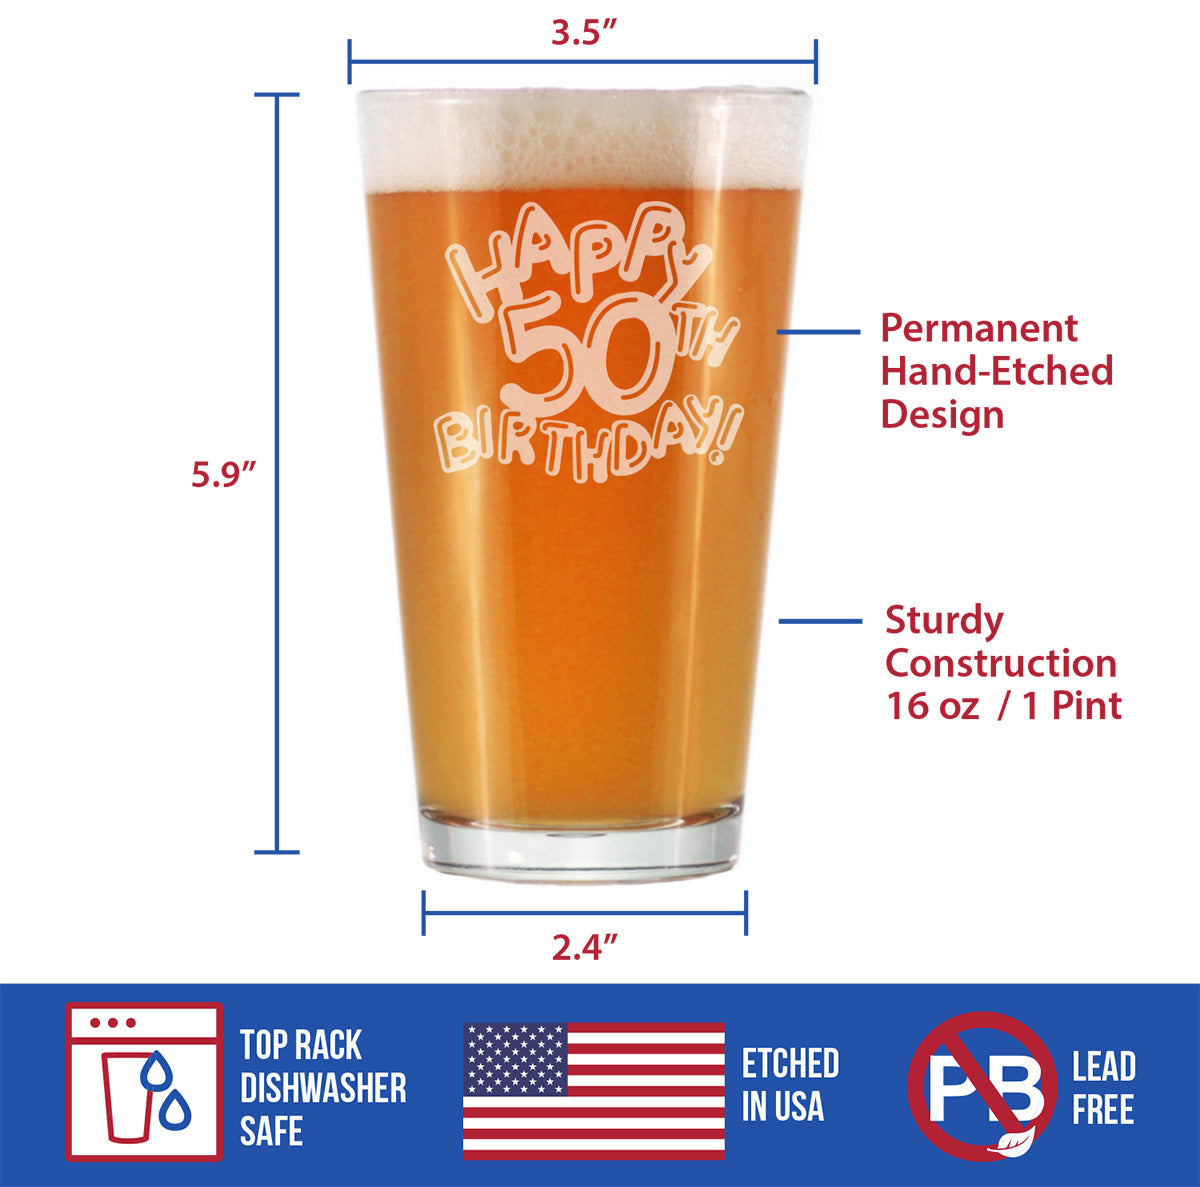 Happy 50th Birthday Balloons - Pint Glass for Beer - Gifts for Women &amp; Men Turning 50 - Fun Bday Party Decor - 16 Oz